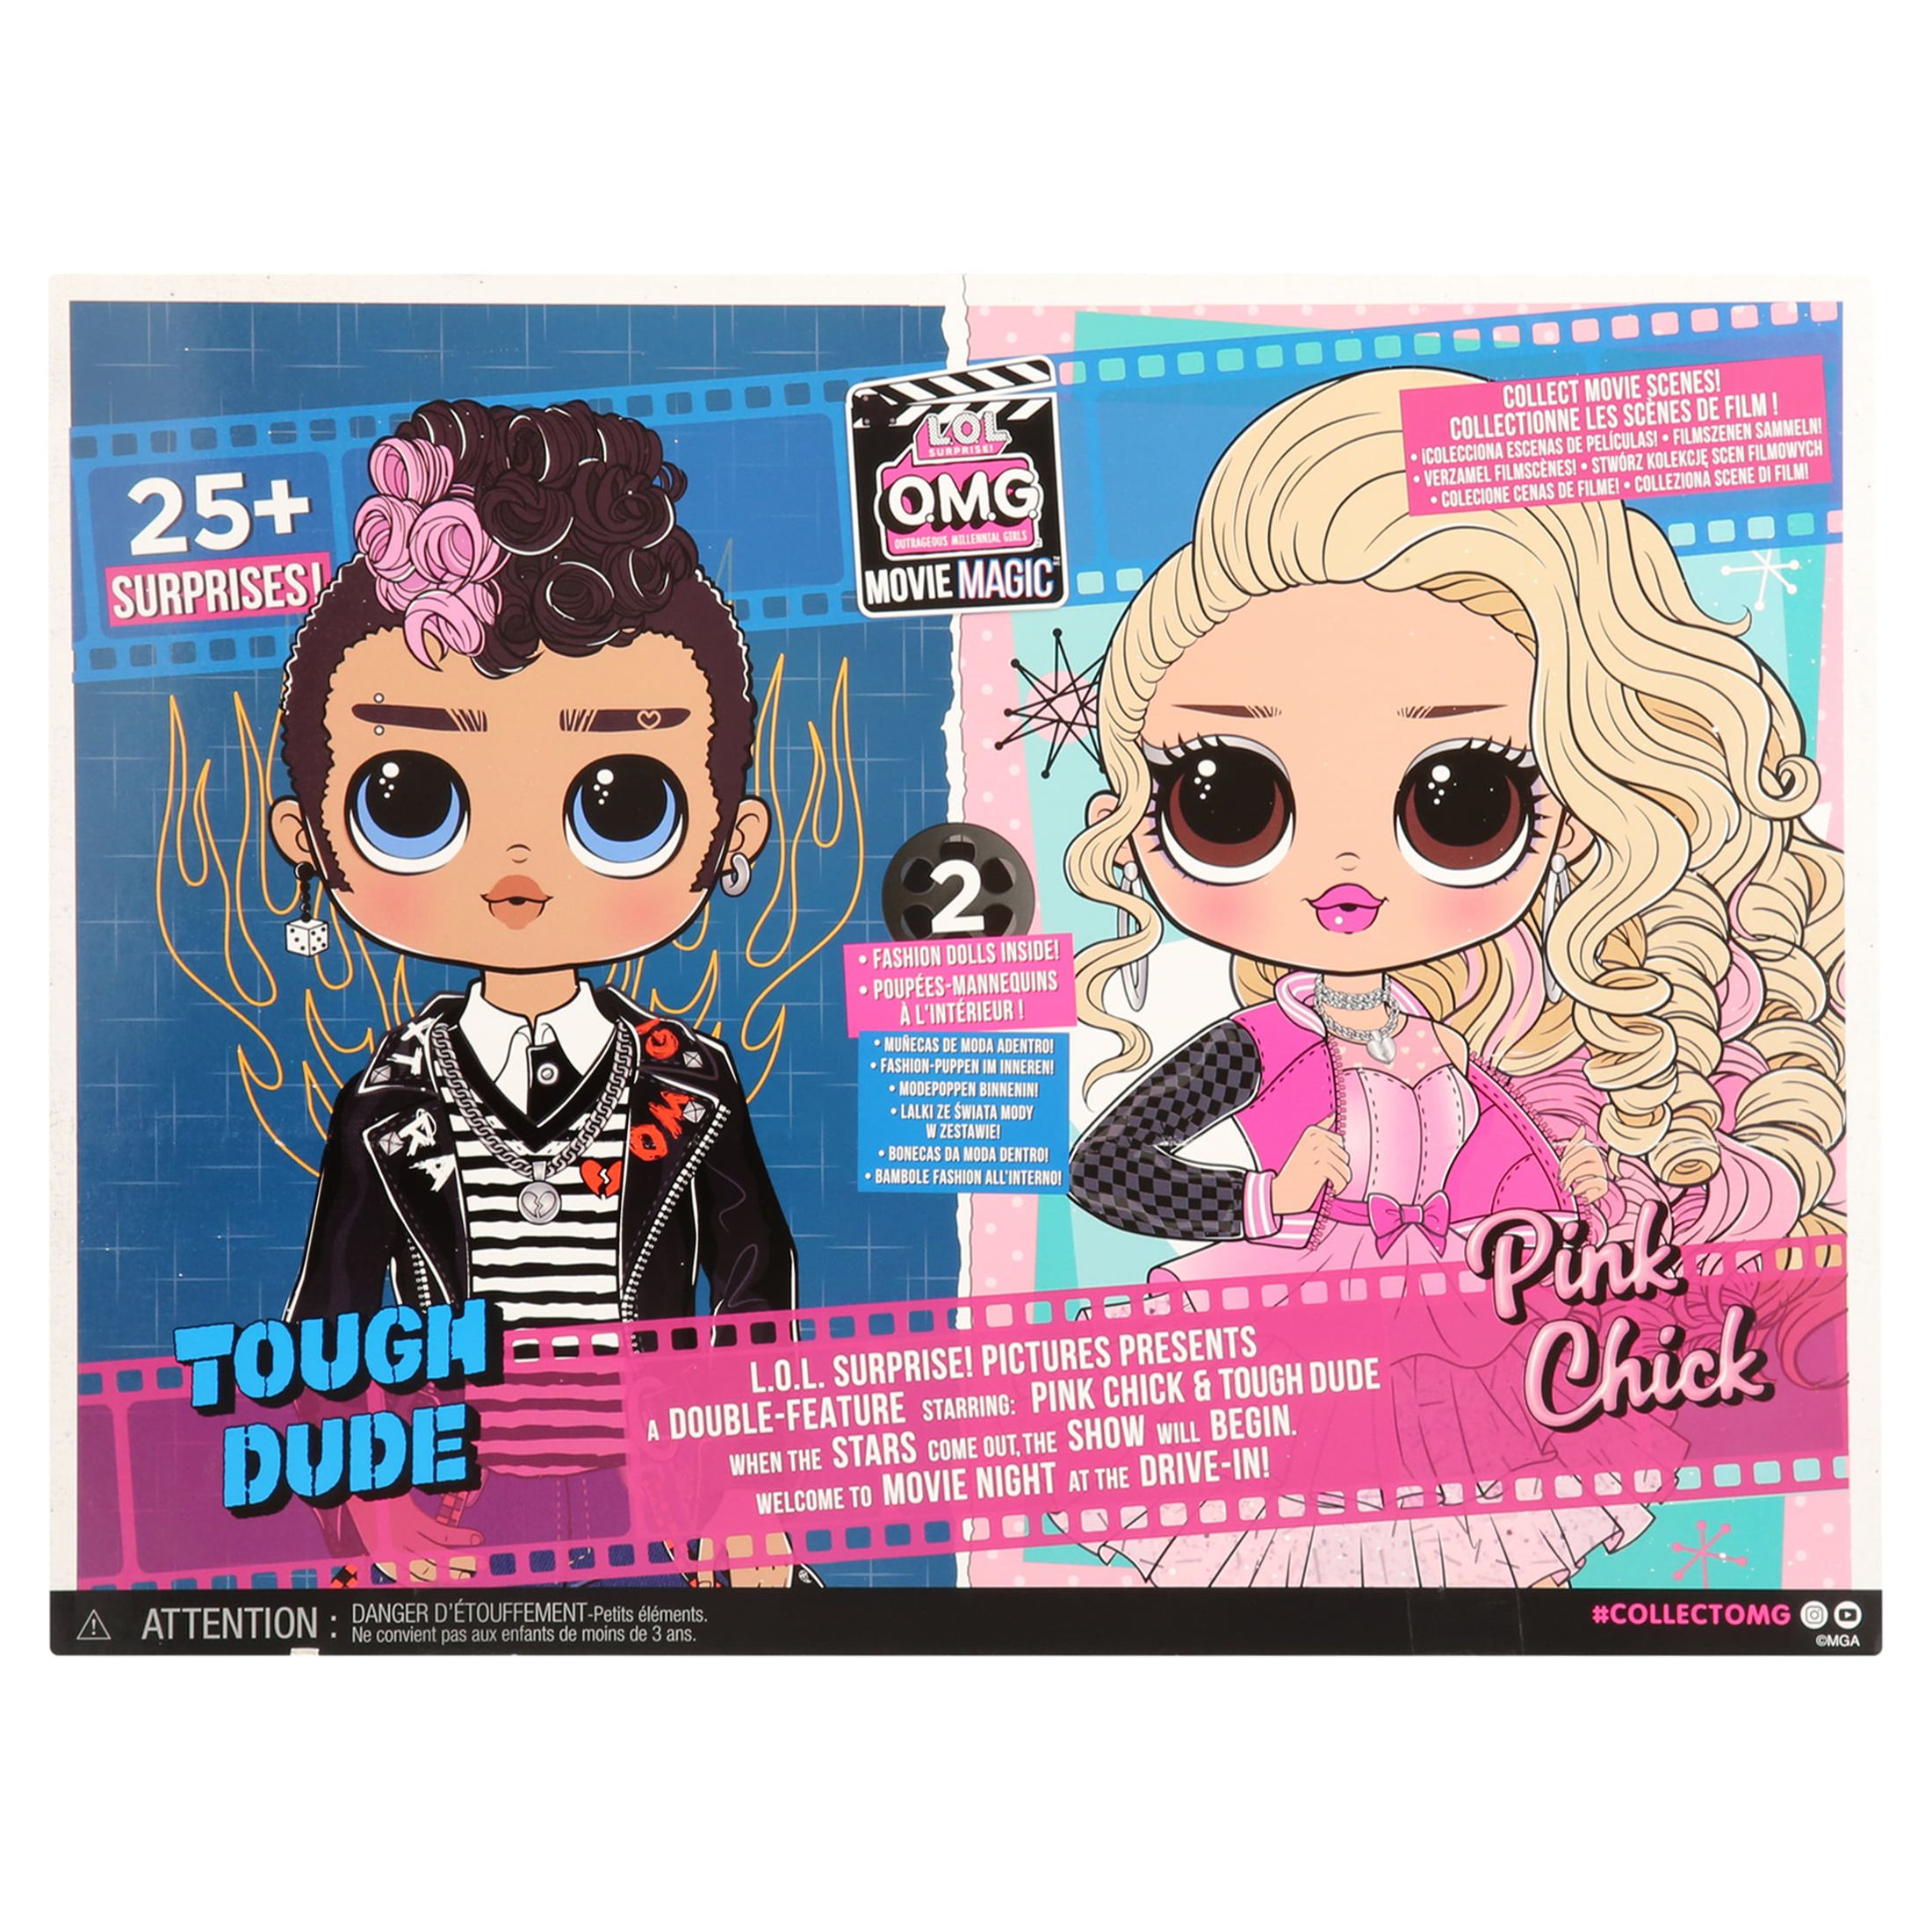 L.O.L Surprise! OMG Movie Magic Fashion Tough Dude and Pink Chick Doll Playset, 25 Pieecs - image 2 of 7